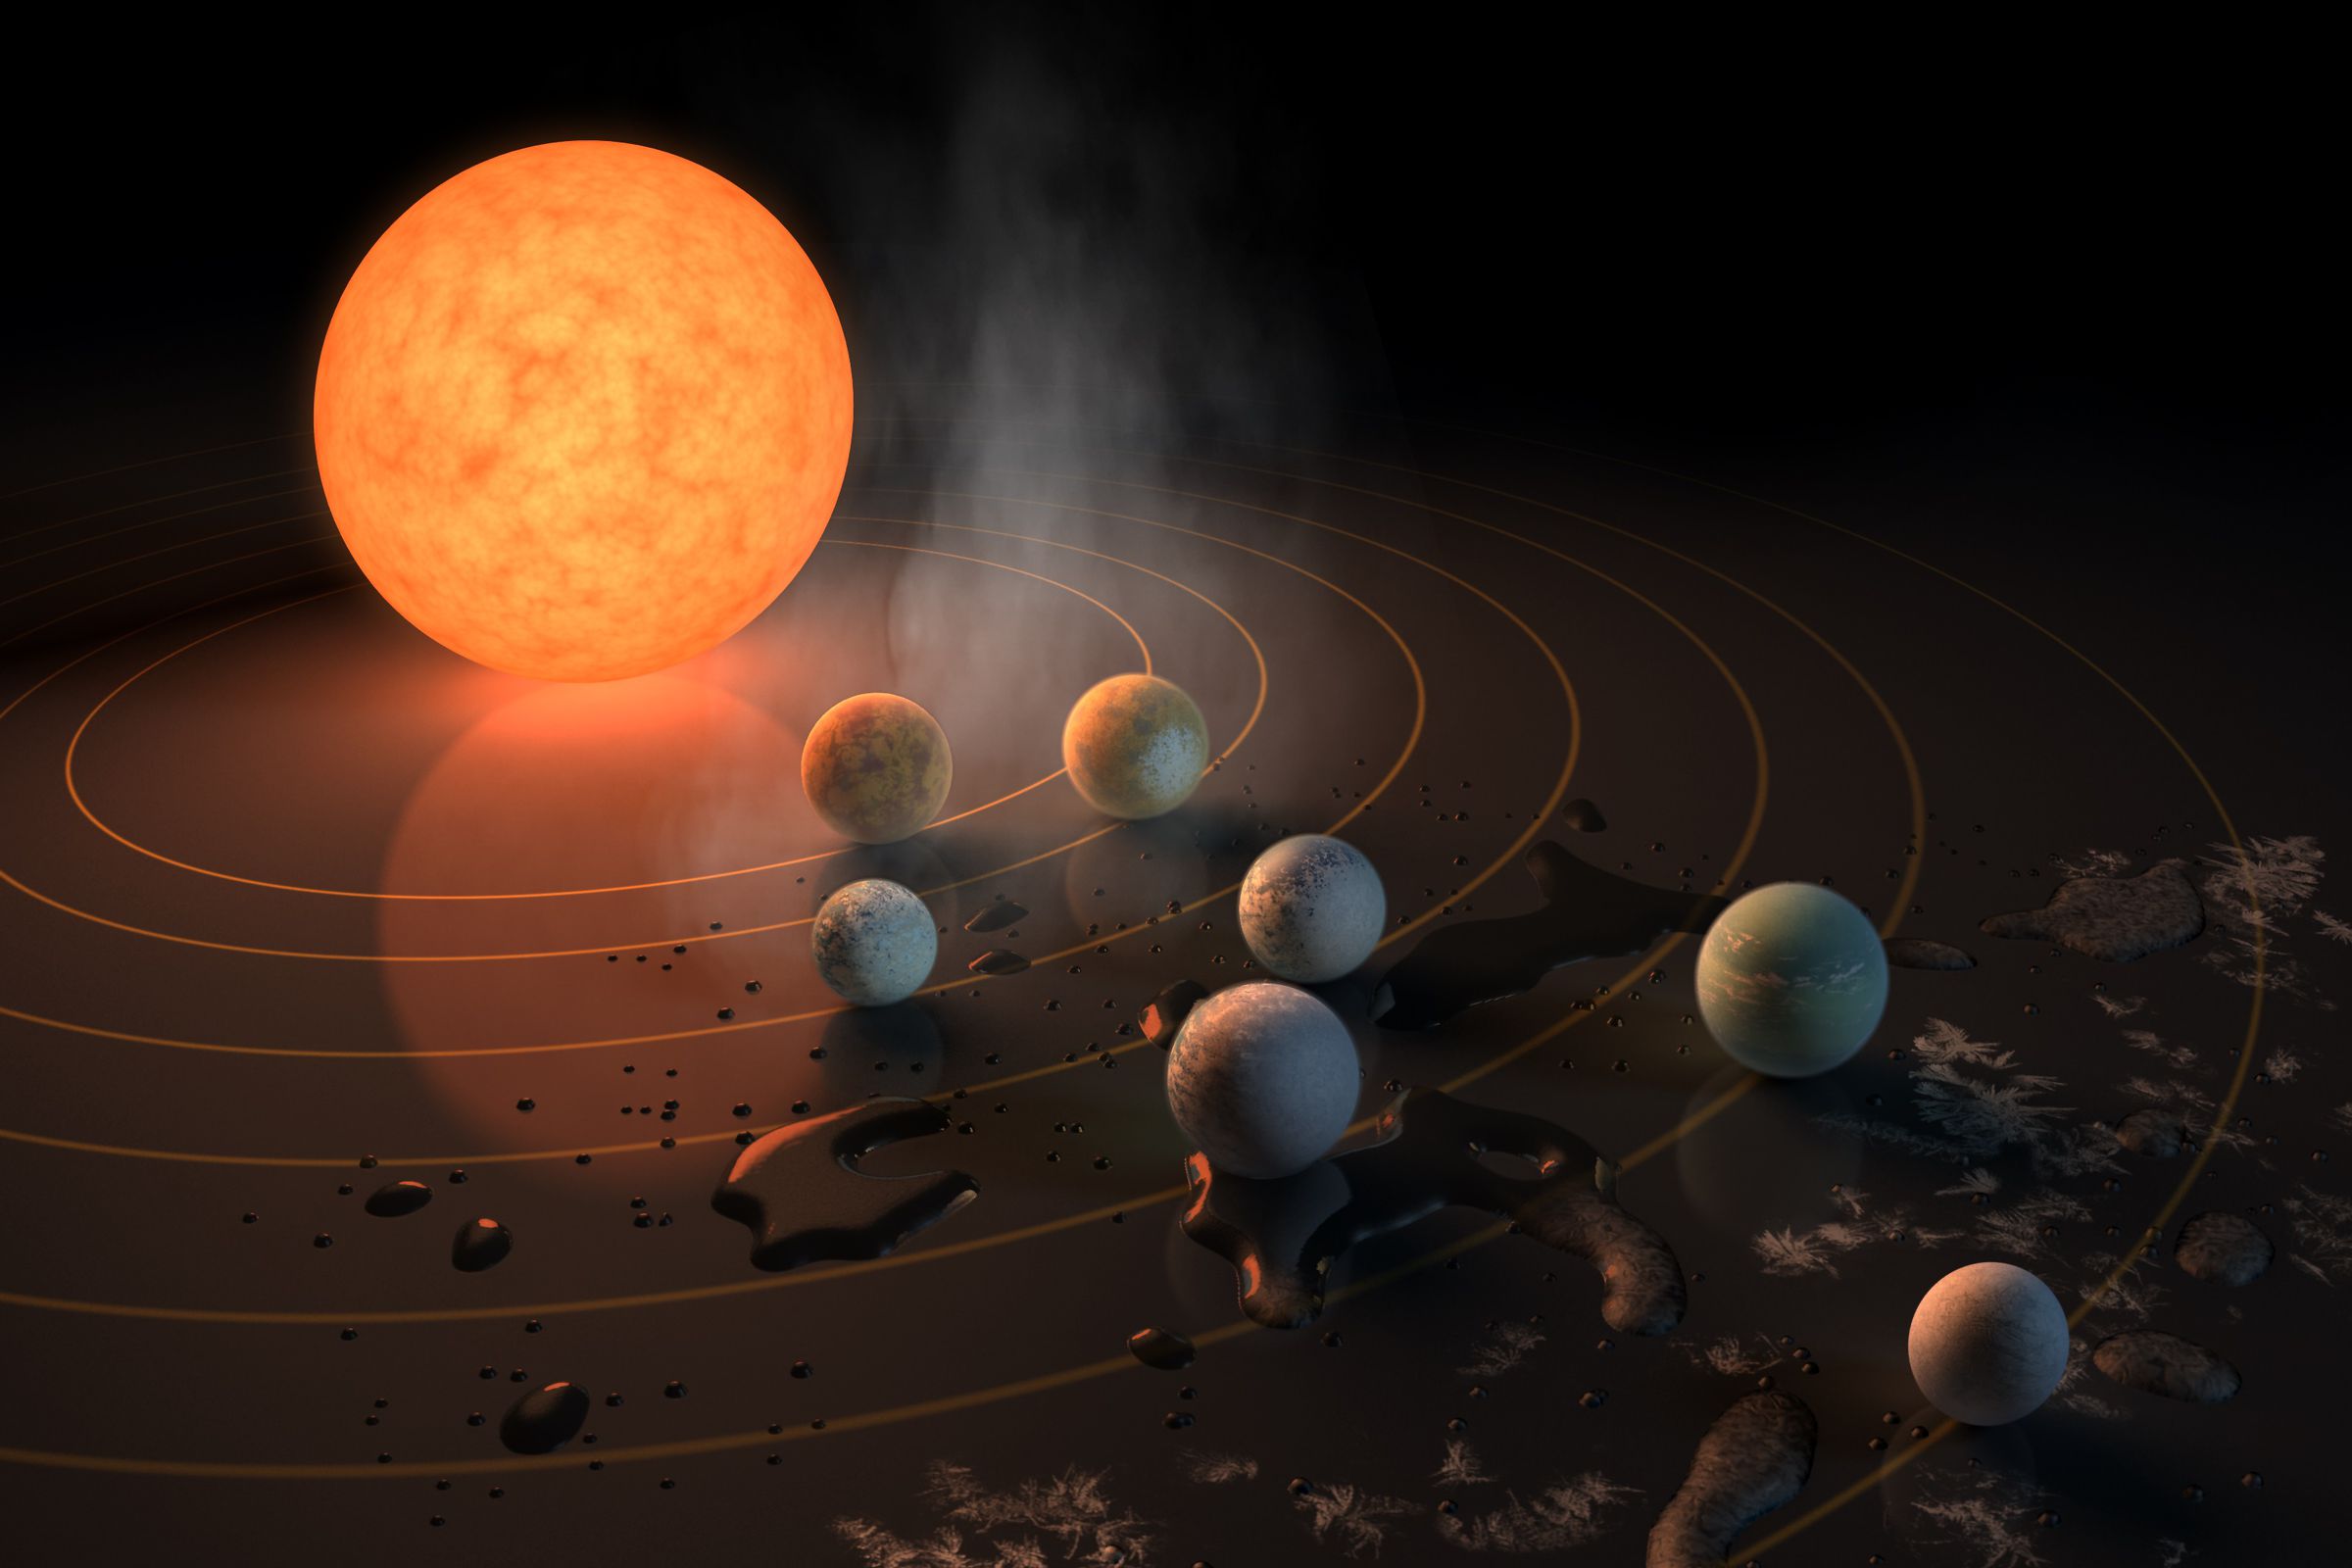 TRAPPIST-1 and its planets.